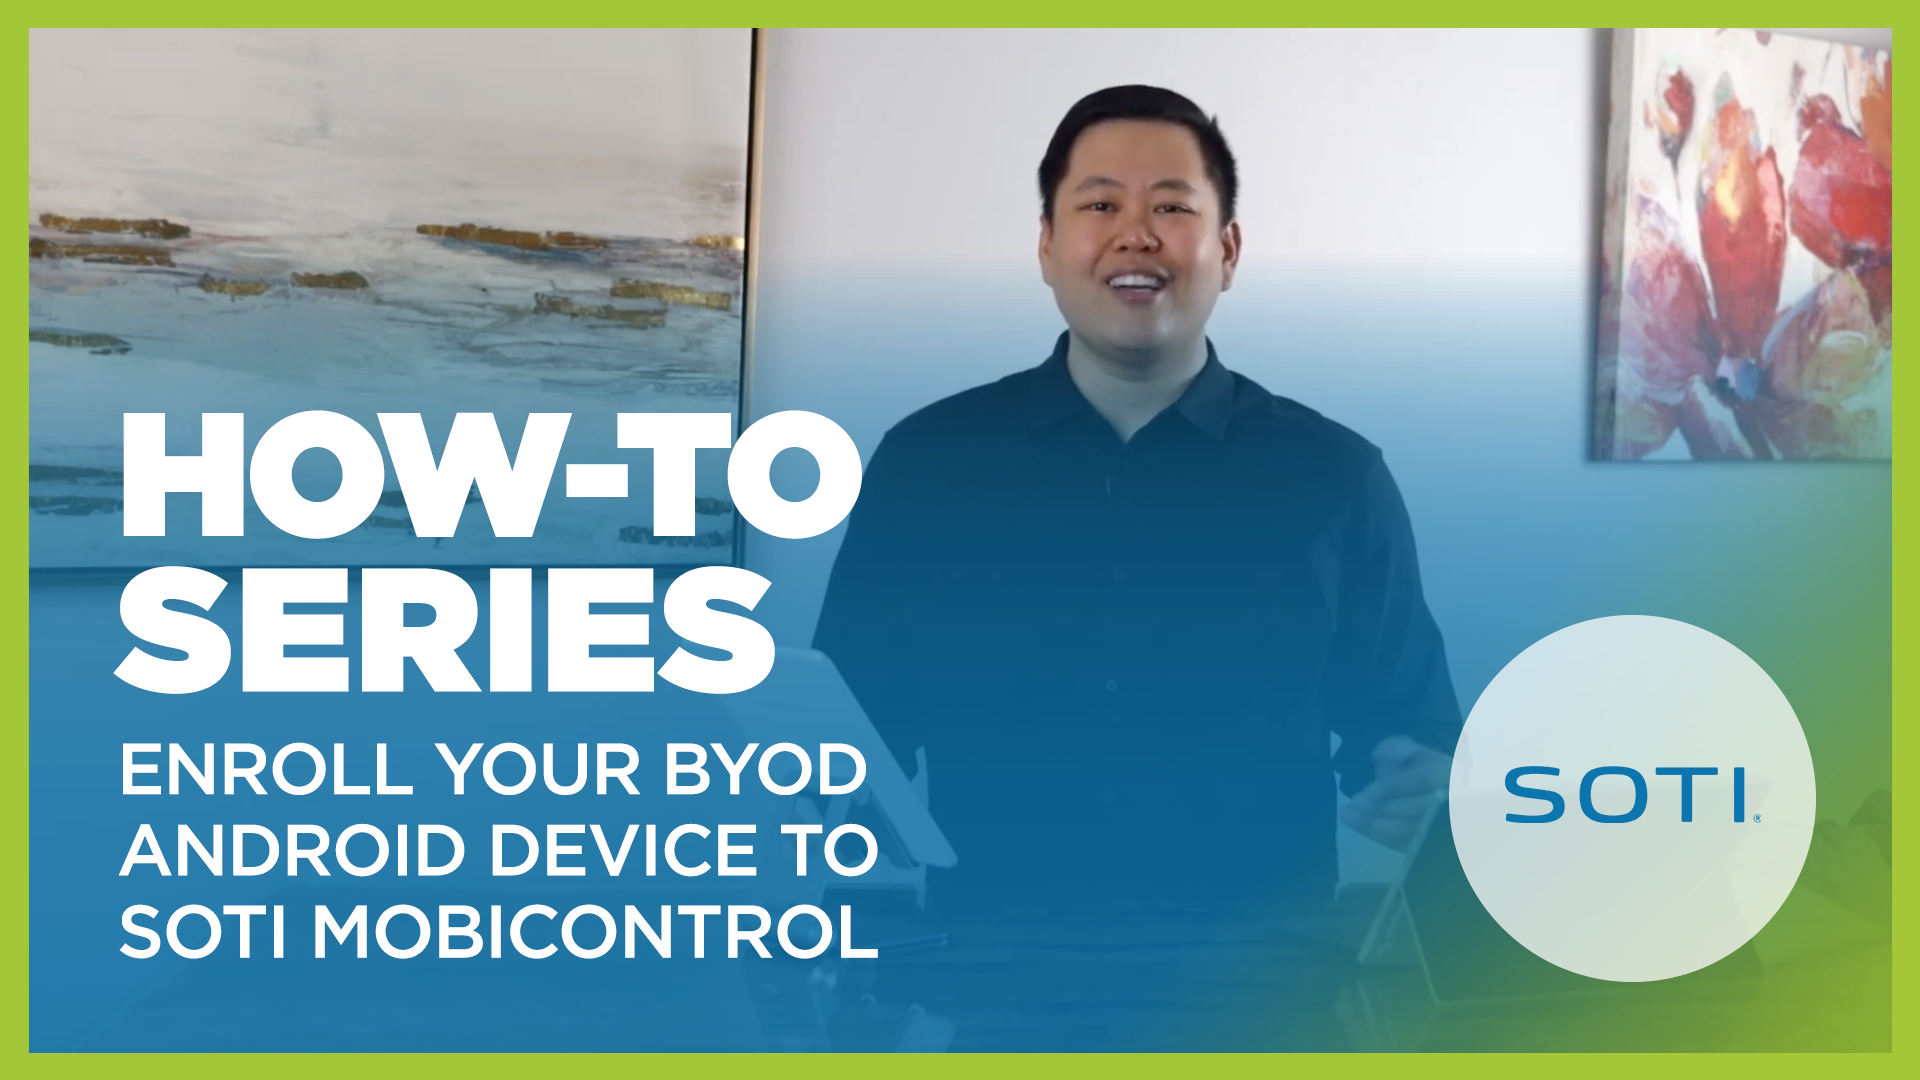 How-To: Enroll Your BYOD Android Device into SOTI MobiControl